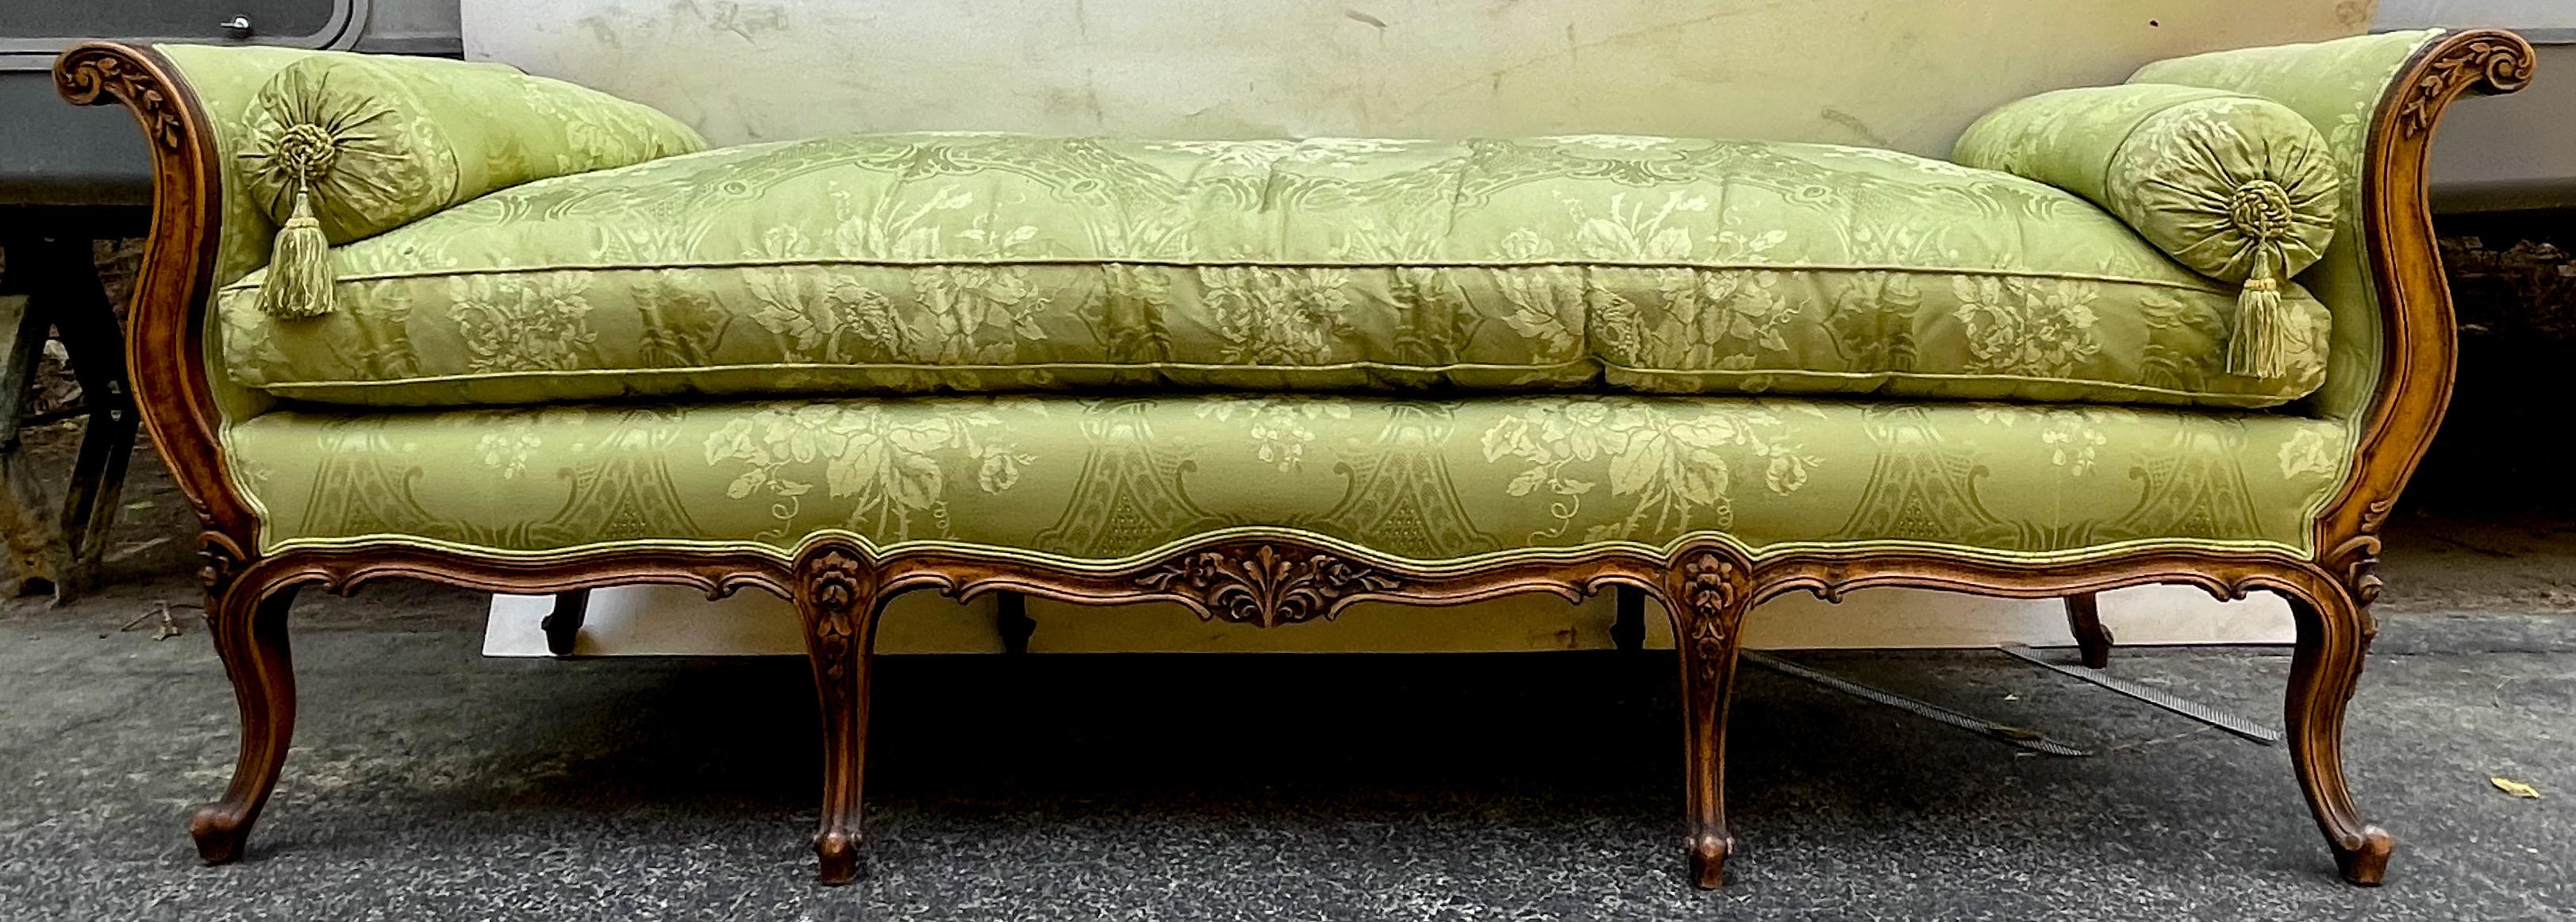 Early 20th Century French Carved Fruitwood Daybed in Green Silk 1